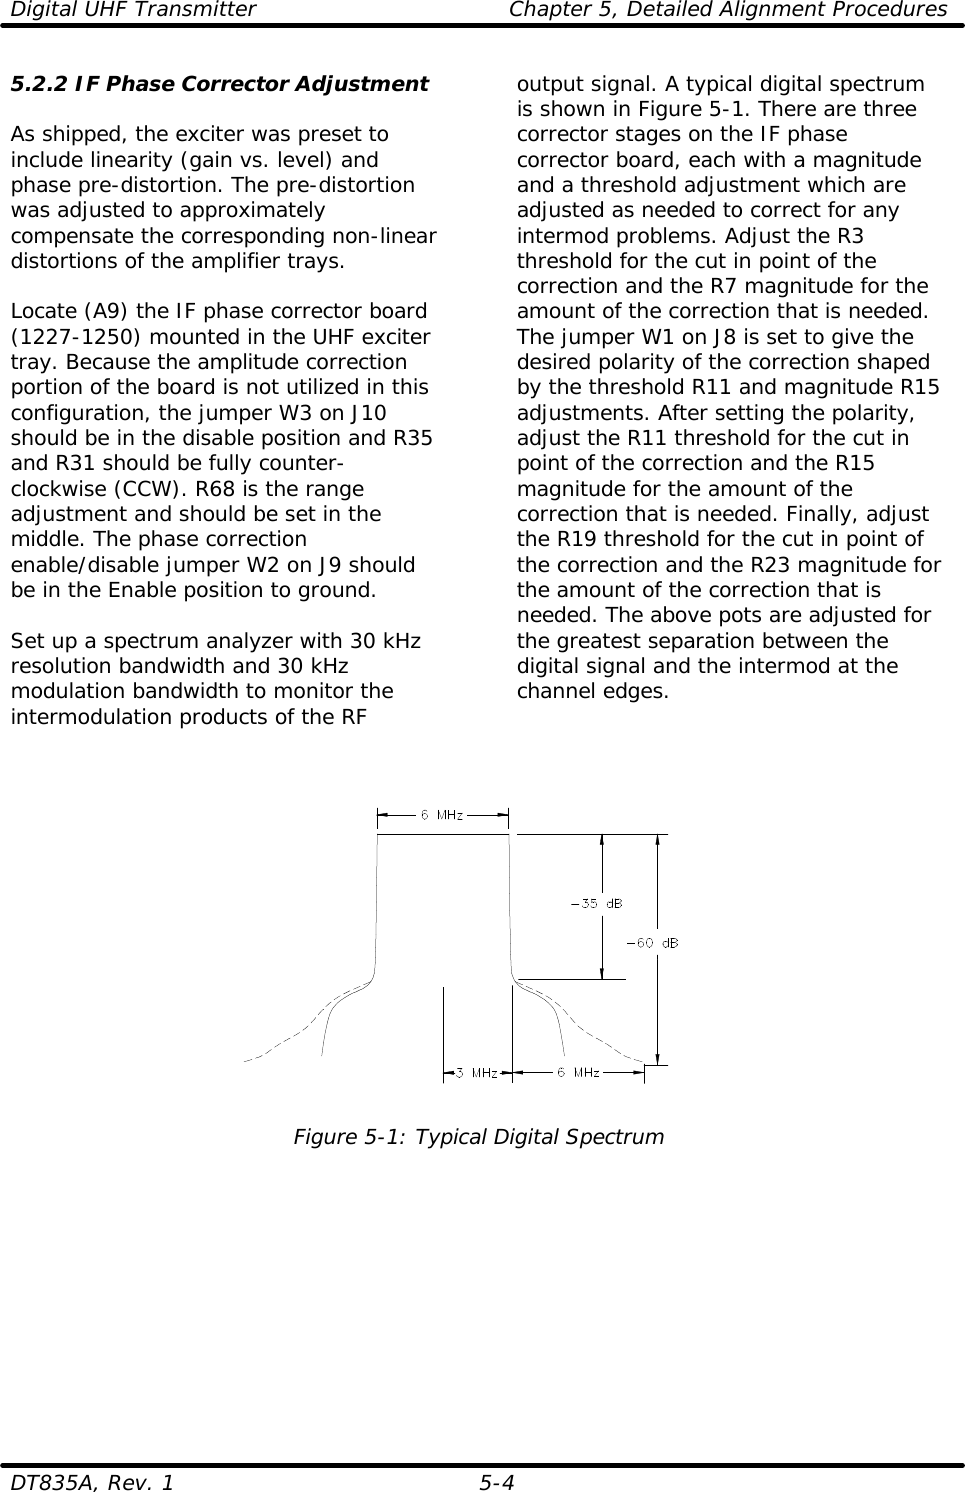 Digital UHF Transmitter    Chapter 5, Detailed Alignment Procedures DT835A, Rev. 1 5-4   5.2.2 IF Phase Corrector Adjustment  As shipped, the exciter was preset to include linearity (gain vs. level) and phase pre-distortion. The pre-distortion was adjusted to approximately compensate the corresponding non-linear distortions of the amplifier trays.  Locate (A9) the IF phase corrector board (1227-1250) mounted in the UHF exciter tray. Because the amplitude correction portion of the board is not utilized in this configuration, the jumper W3 on J10 should be in the disable position and R35 and R31 should be fully counter-clockwise (CCW). R68 is the range adjustment and should be set in the middle. The phase correction enable/disable jumper W2 on J9 should be in the Enable position to ground.  Set up a spectrum analyzer with 30 kHz resolution bandwidth and 30 kHz modulation bandwidth to monitor the intermodulation products of the RF output signal. A typical digital spectrum is shown in Figure 5-1. There are three corrector stages on the IF phase corrector board, each with a magnitude and a threshold adjustment which are adjusted as needed to correct for any intermod problems. Adjust the R3 threshold for the cut in point of the correction and the R7 magnitude for the amount of the correction that is needed. The jumper W1 on J8 is set to give the desired polarity of the correction shaped by the threshold R11 and magnitude R15 adjustments. After setting the polarity, adjust the R11 threshold for the cut in point of the correction and the R15 magnitude for the amount of the correction that is needed. Finally, adjust the R19 threshold for the cut in point of the correction and the R23 magnitude for the amount of the correction that is needed. The above pots are adjusted for the greatest separation between the digital signal and the intermod at the channel edges.      Figure 5-1: Typical Digital Spectrum  